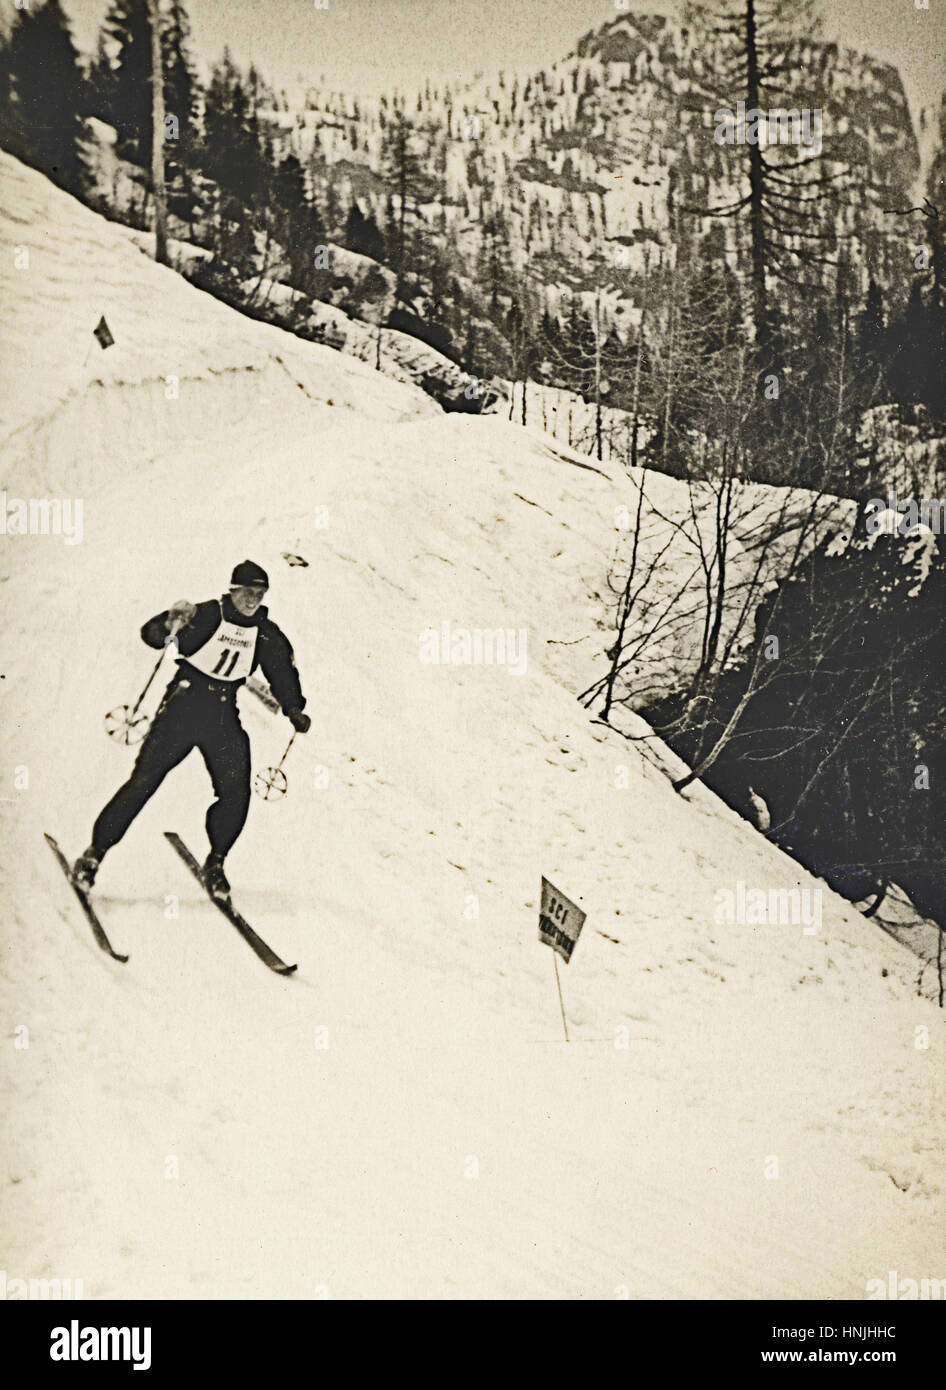 Canins 1937, Italy. Skier at slalom ski race. Scan from analog photography, private family collection before WWII. Stock Photo